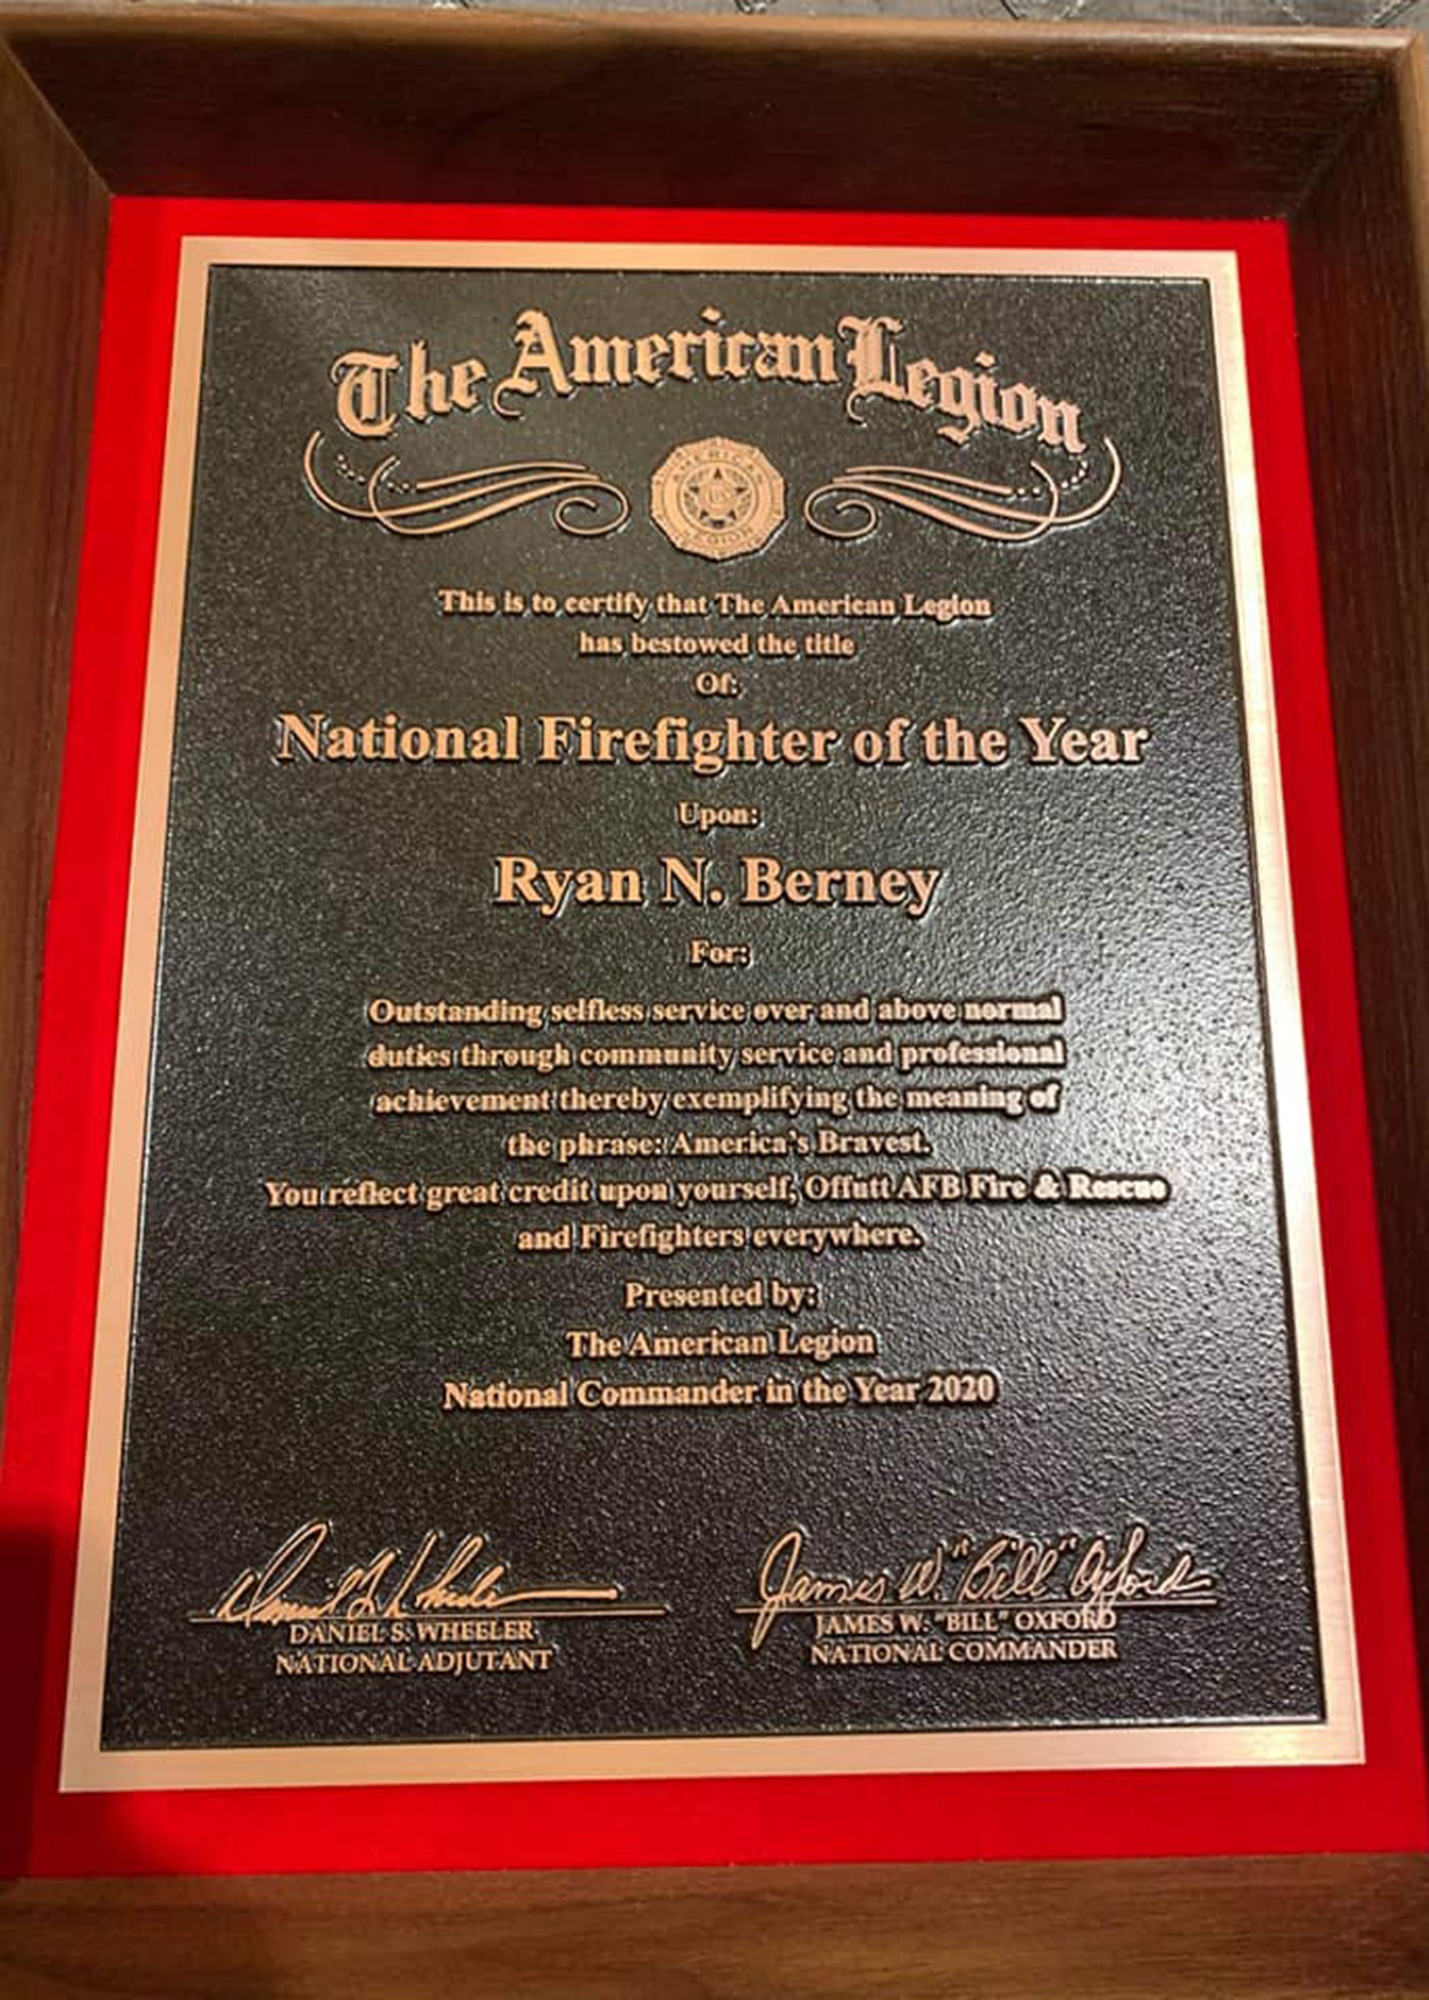 Picture of the American Legion National firefighter of the year award.